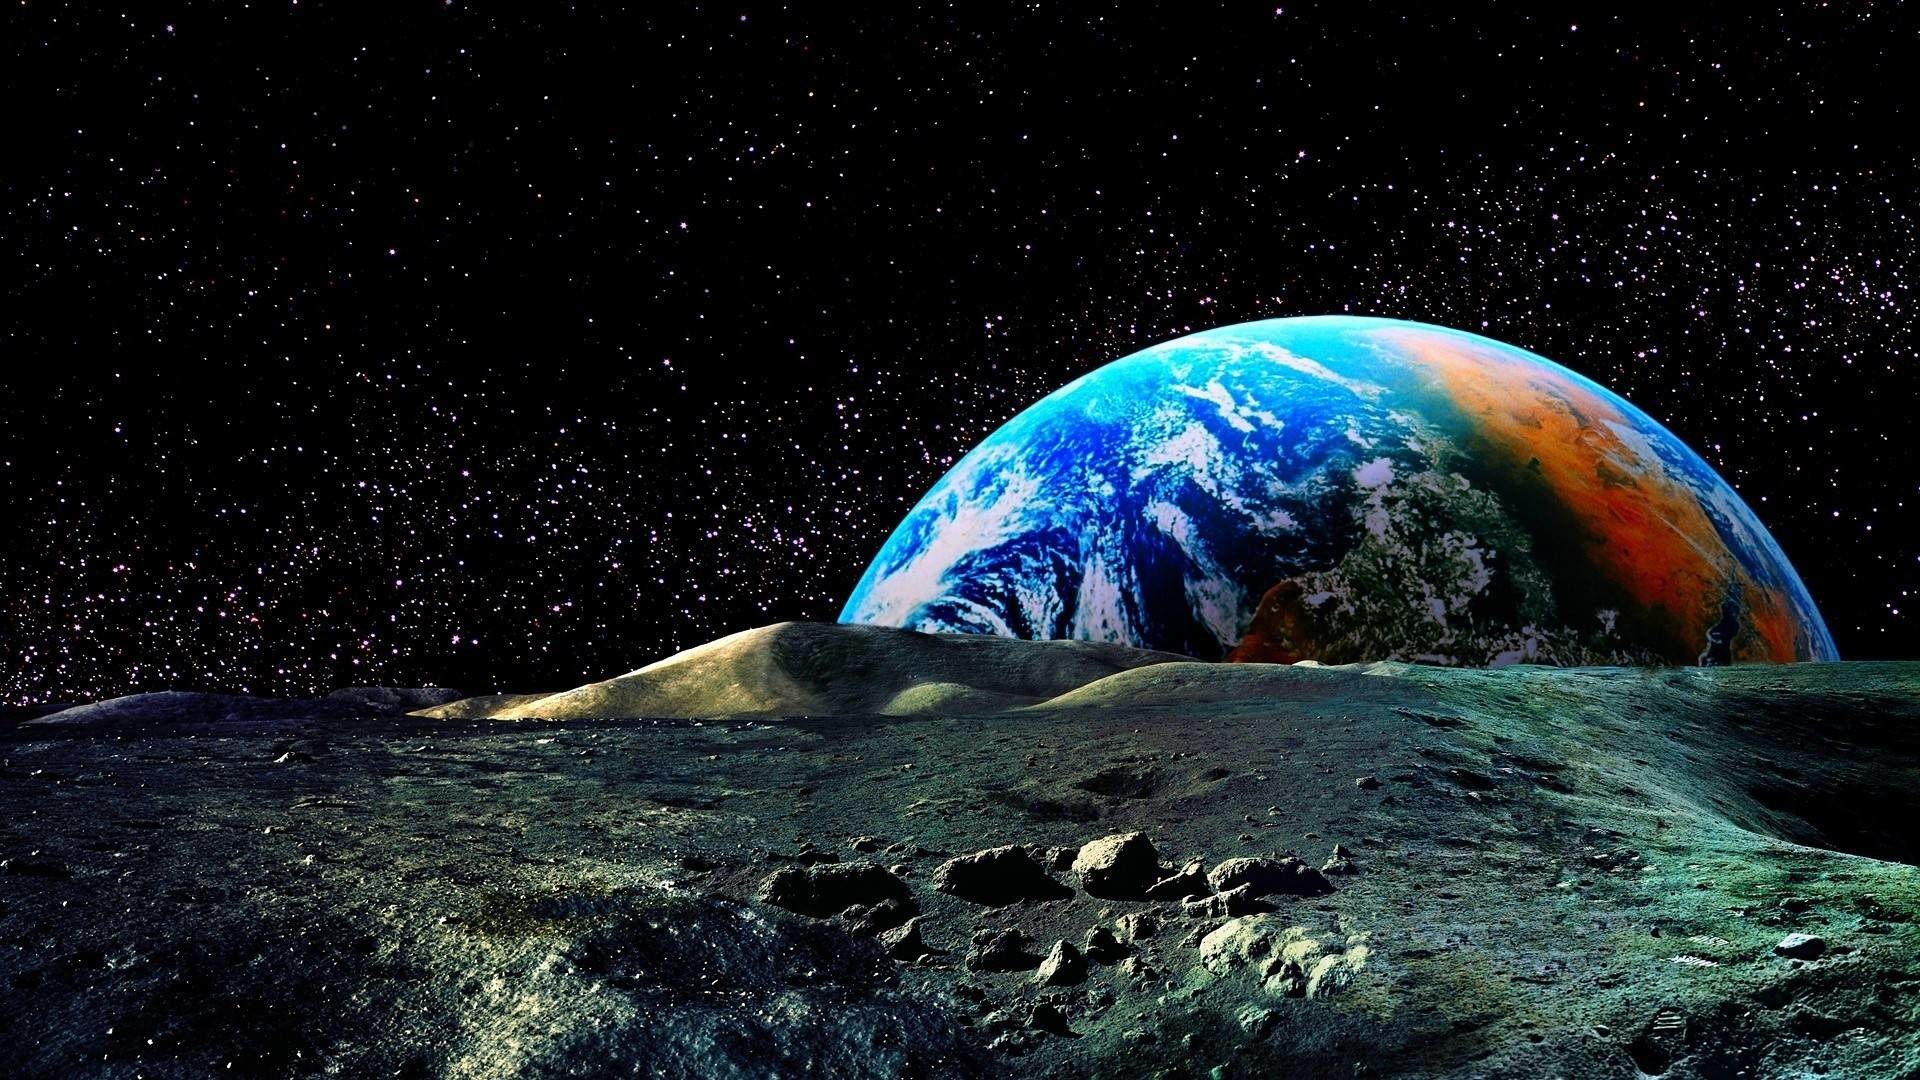 1920x1080 Desktop Backgrounds Earth From Space Fresh Hubble Just Discovered Another  Moon Hiding at the Back Of